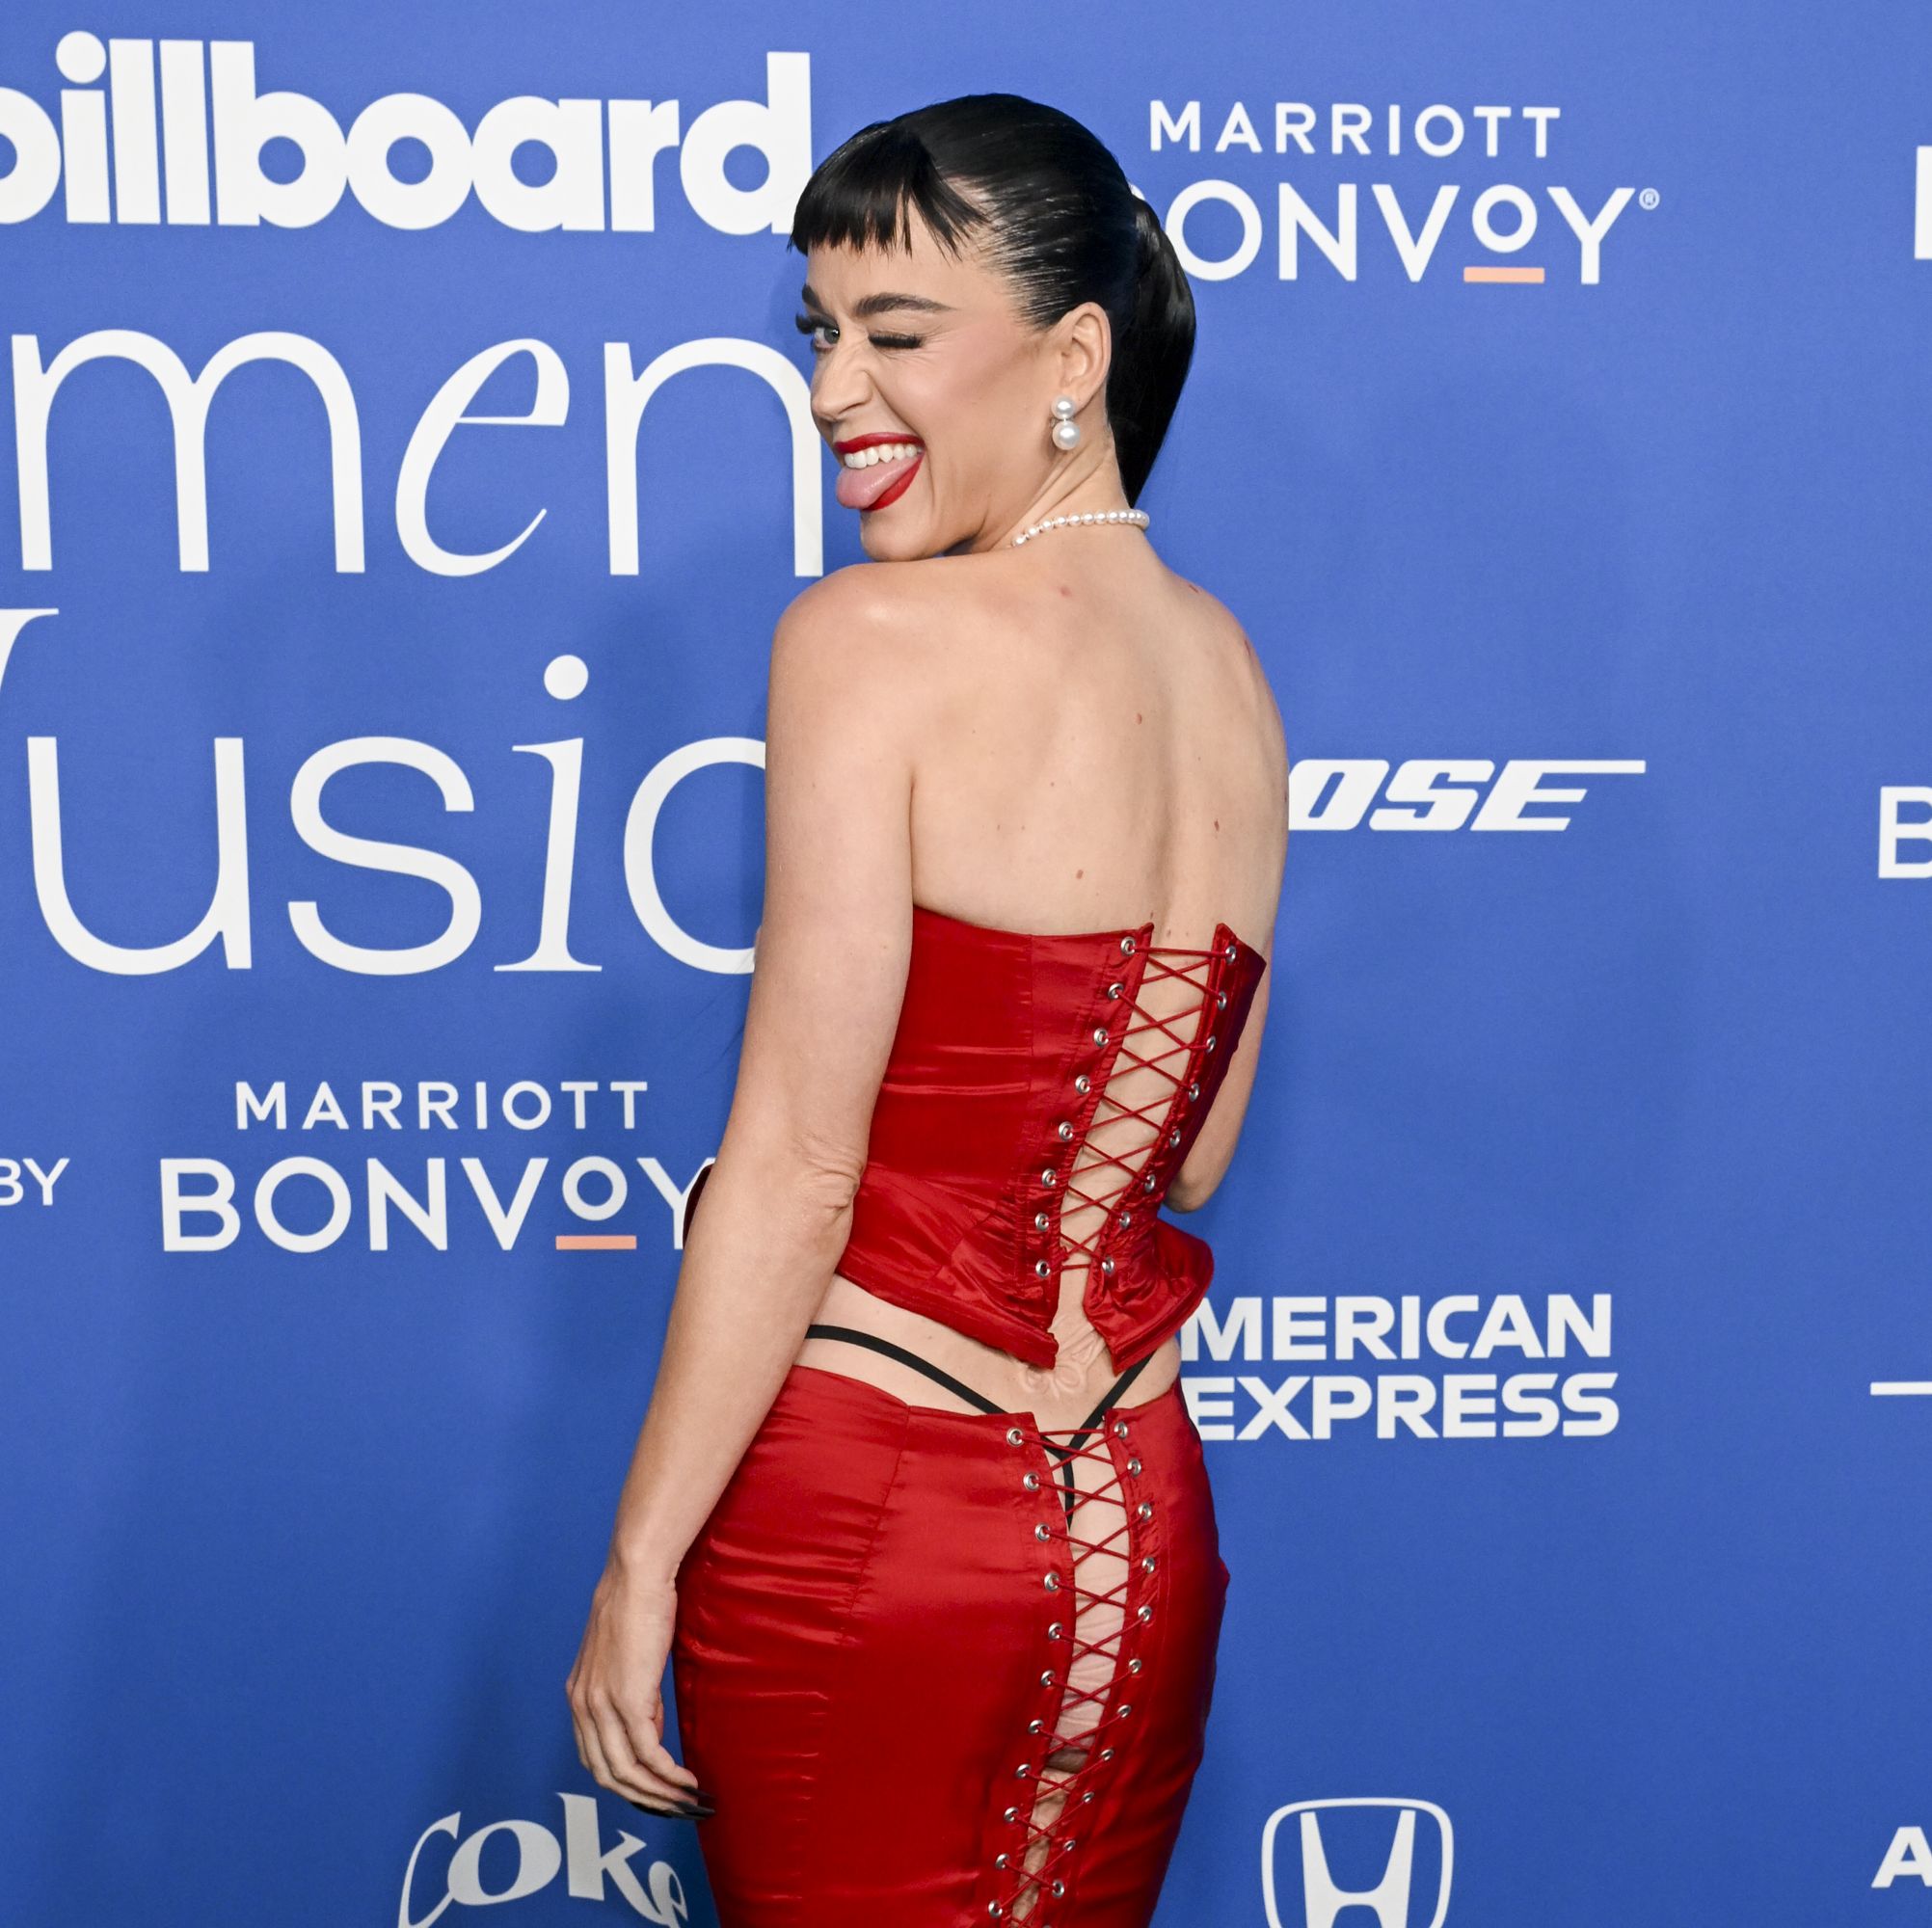 Katy Perry Wore a Butt Corset That Showed Off Her Exposed G-String on the Red Carpet